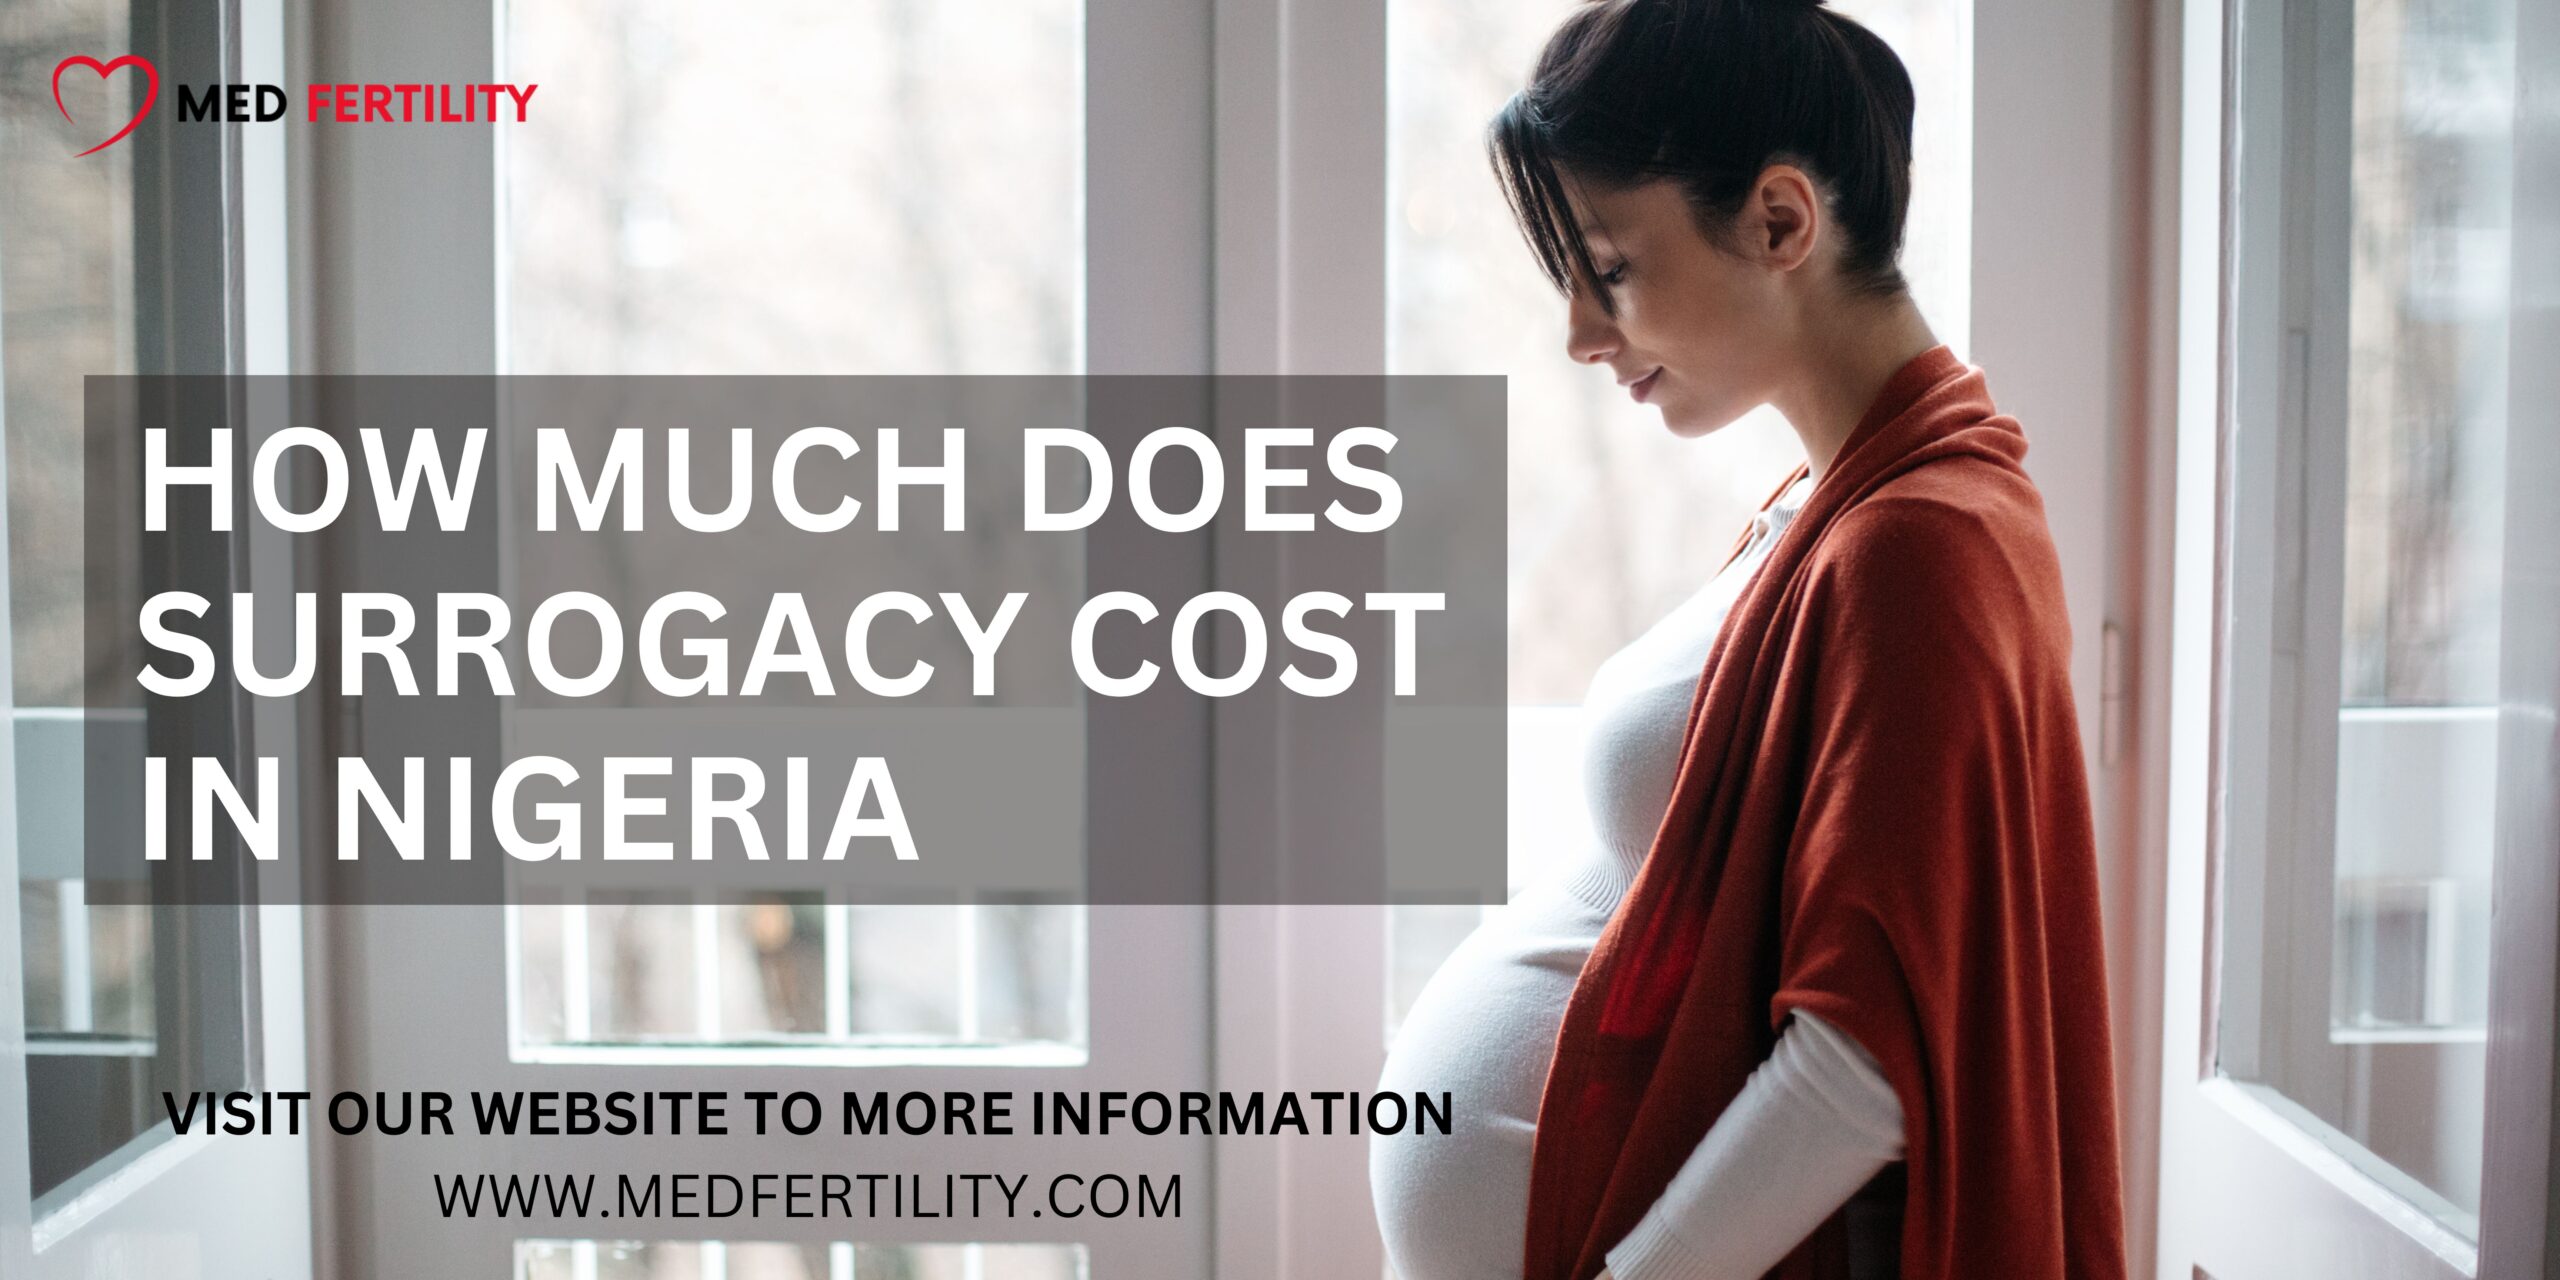 How Much Does Surrogacy Cost in Nigeria